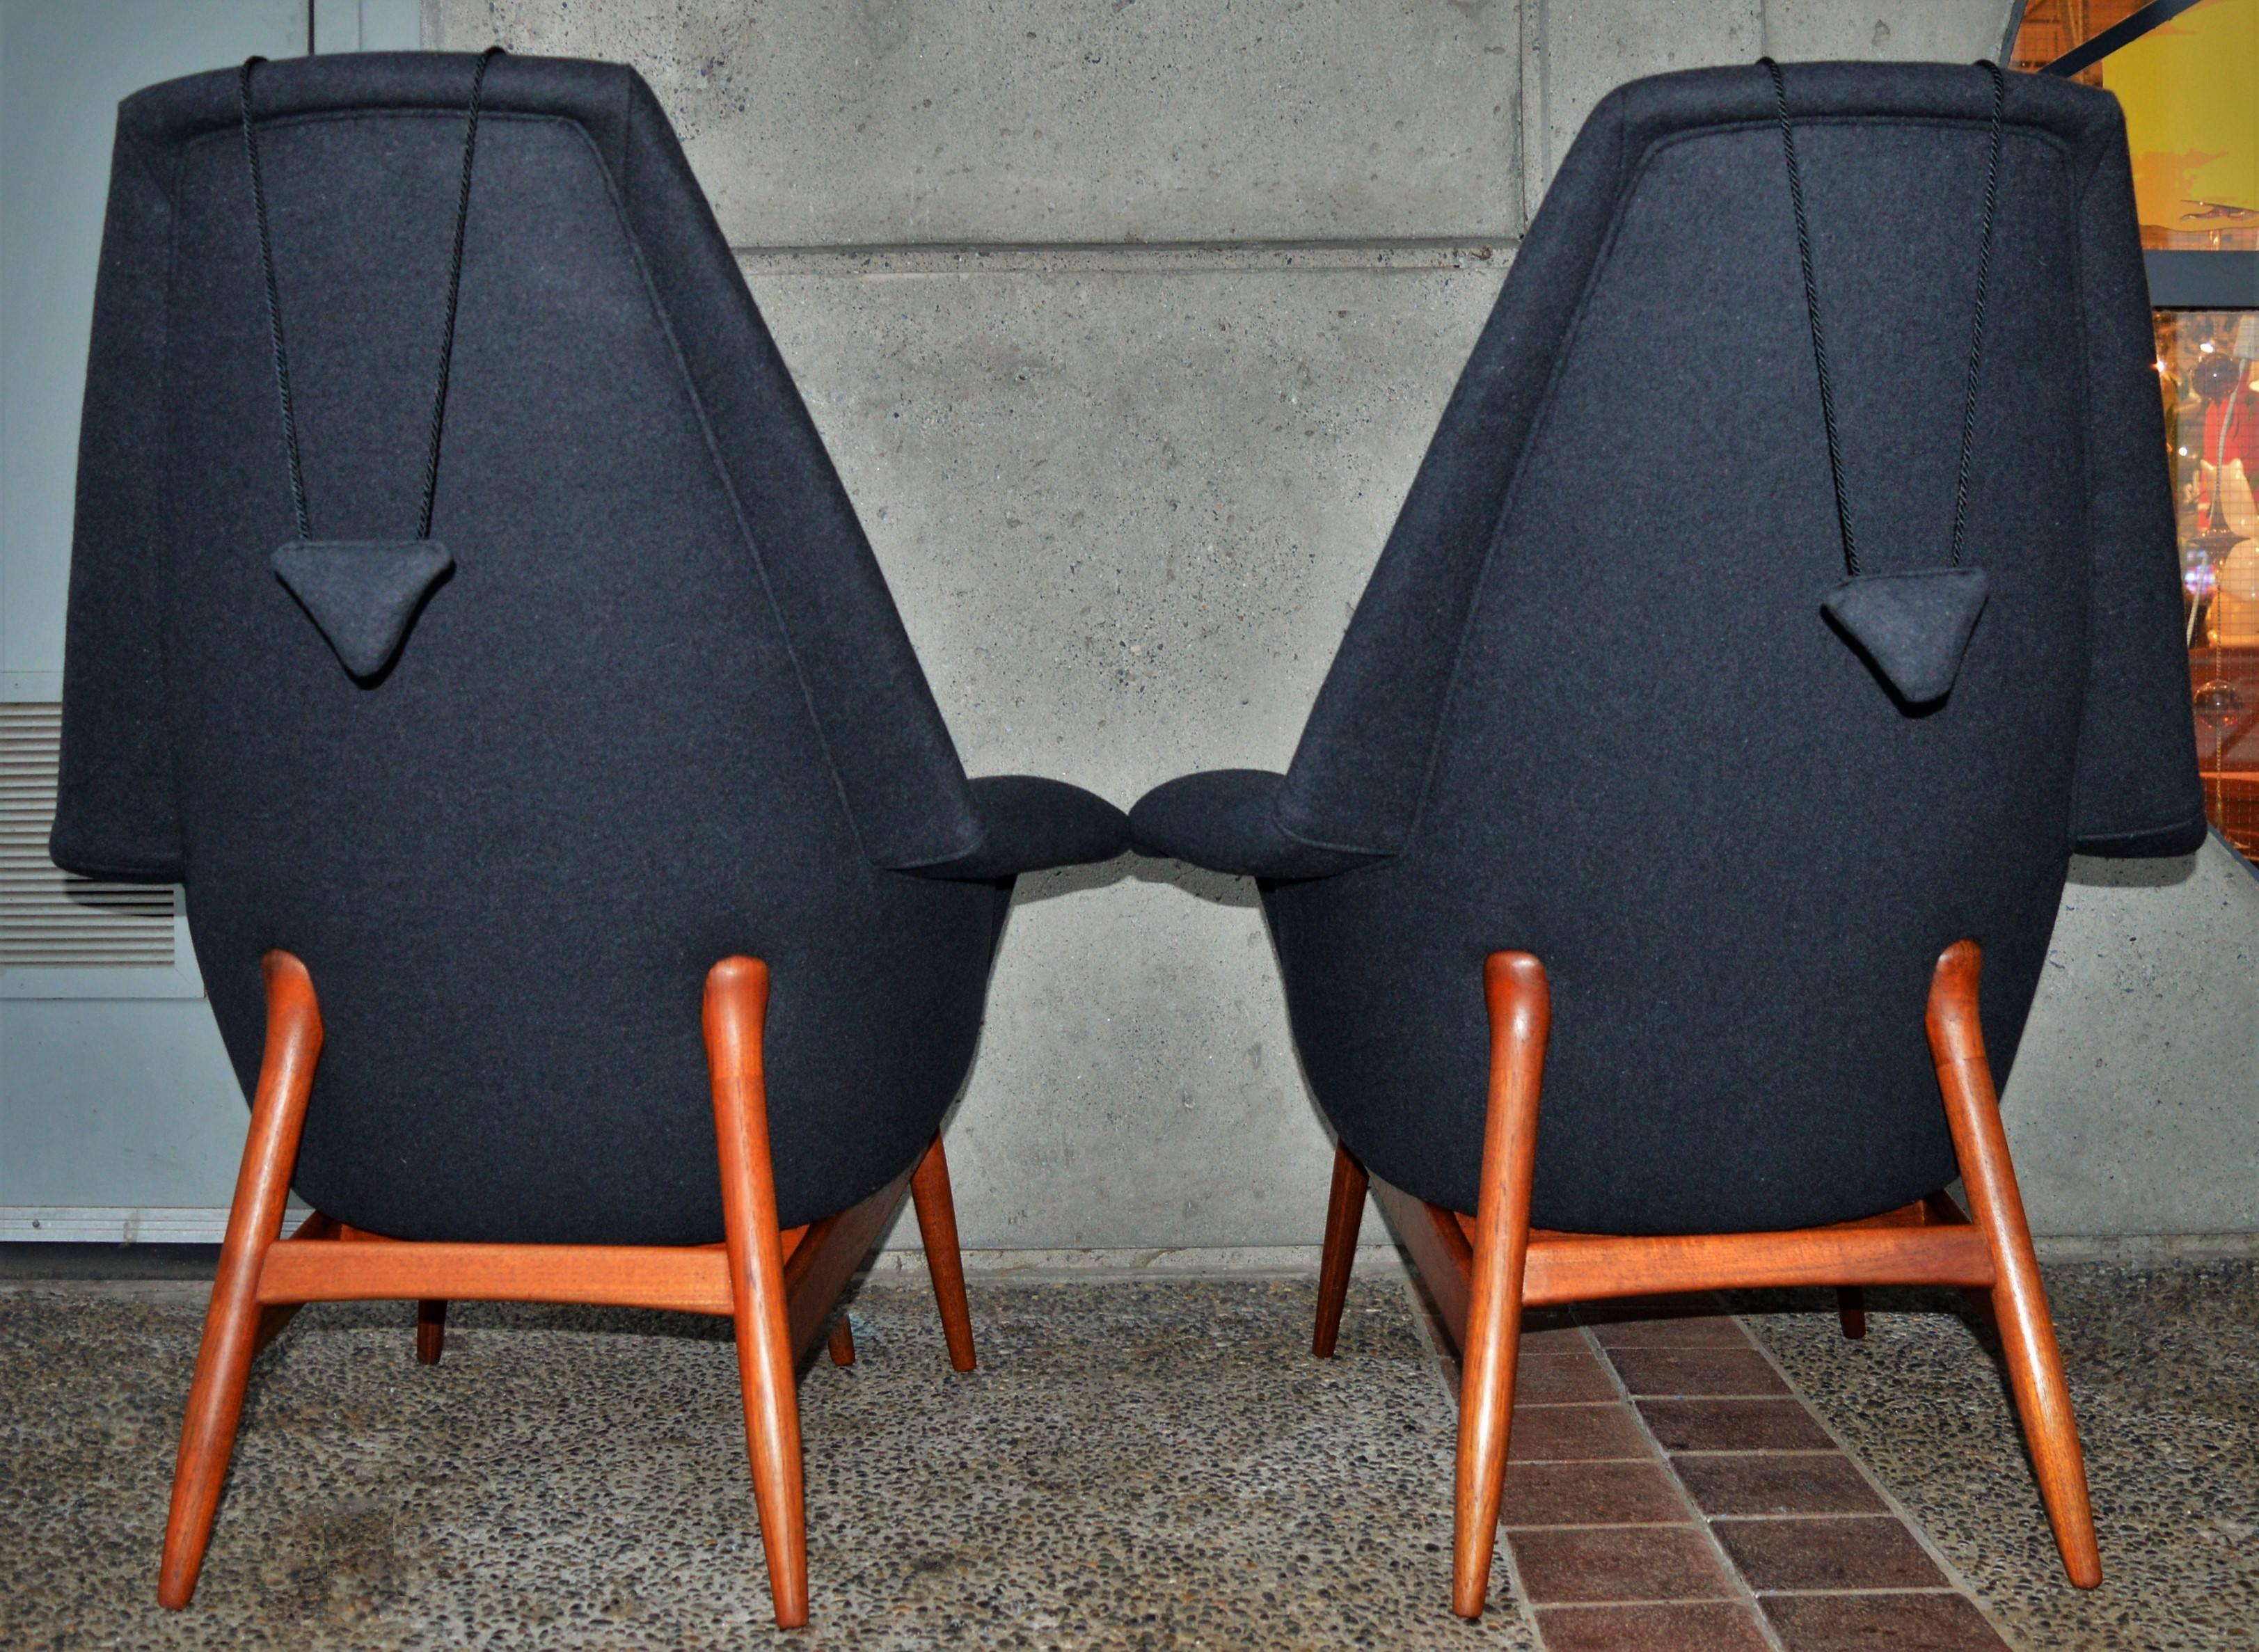 Pair of Teak Manta Ray Chairs in Charcoal Wool by Bjorn Engo for DUX 1